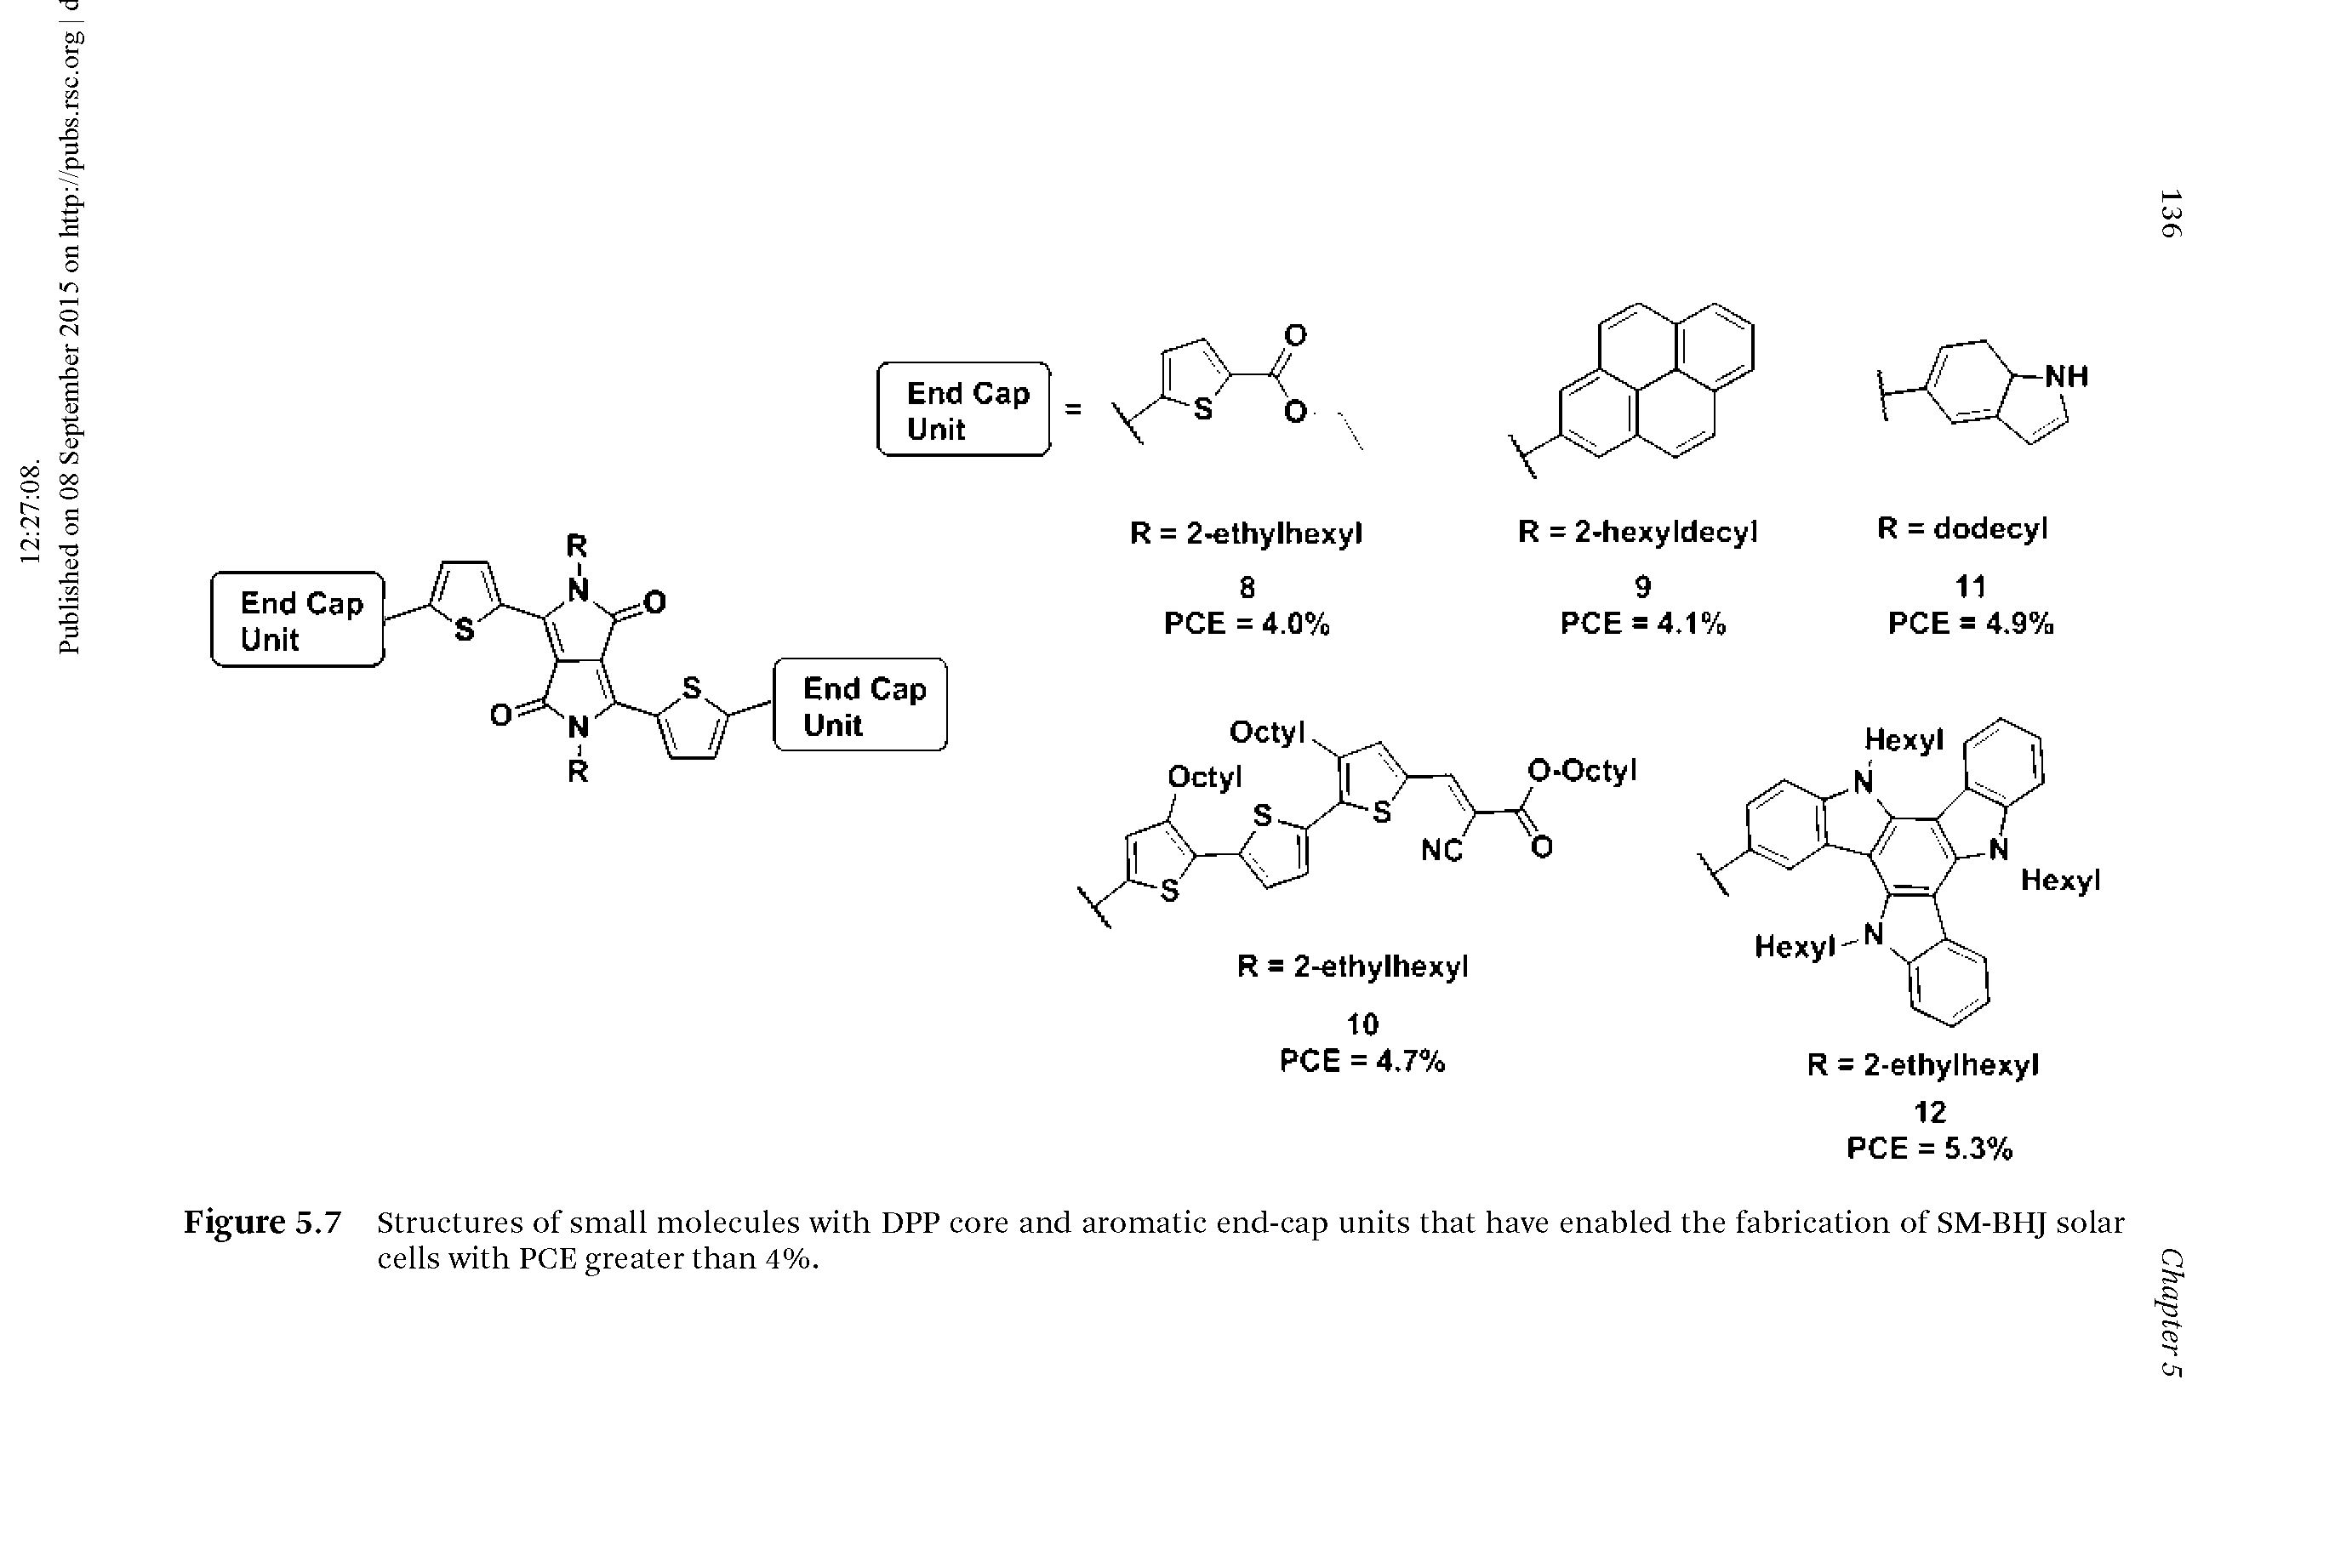 Figure 5.7 Structures of small molecules with DPP core and aromatic end-cap units that have enabled the fabrication of SM-BHJ solar cells with PCE greater than 4%.